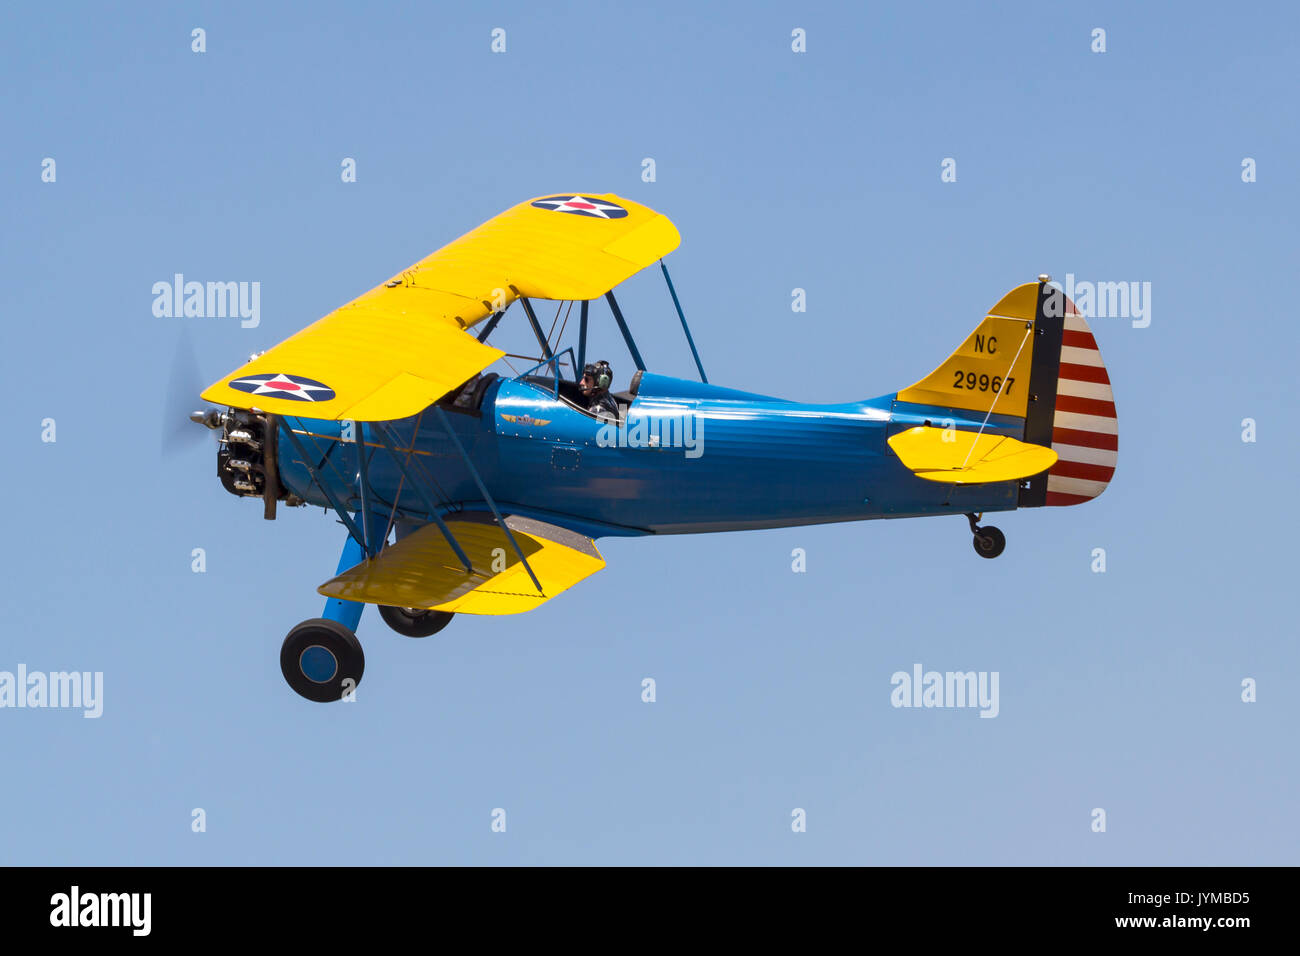 1940 Waco UPF-7 biplane in U.S Army markings in flight during the 2017 Nevada County Airfest Stock Photo